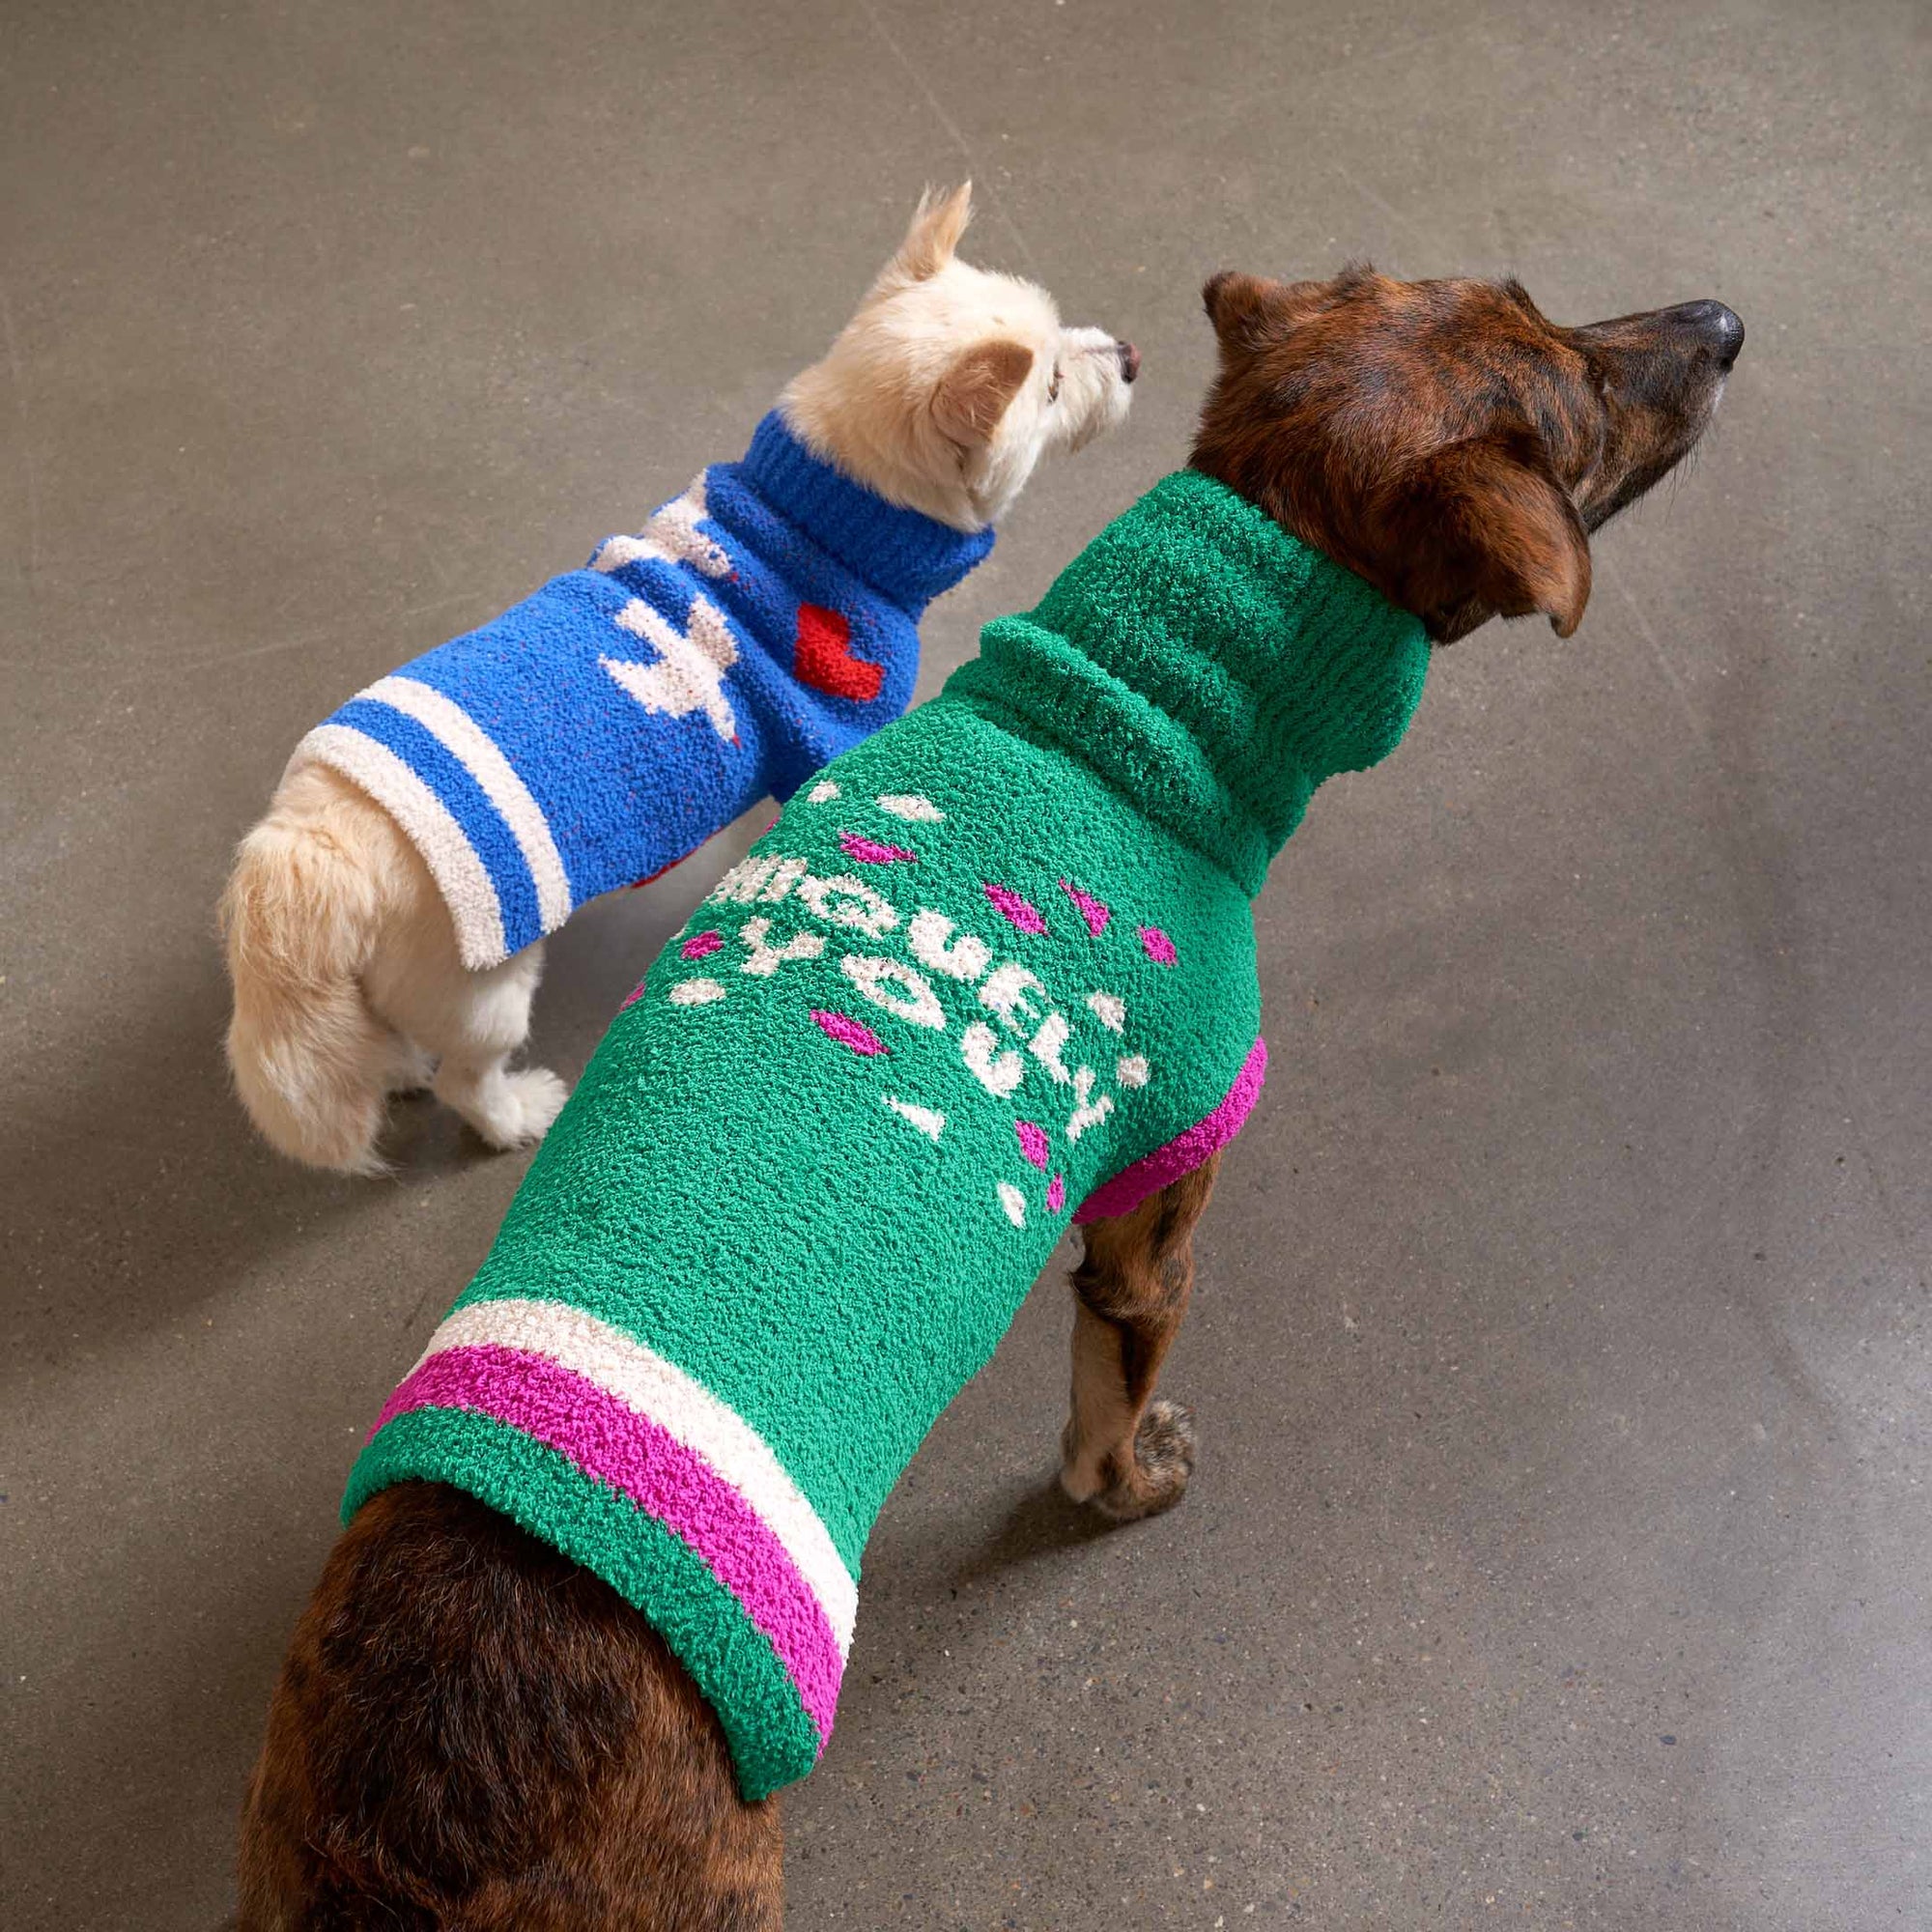 Two dogs in colorful sweaters stand on a concrete floor, with the larger brown dog in a green "Uniquely You" sweater looking upwards, and the smaller dog in a blue sweater with heart and bird patterns looking off-camera.